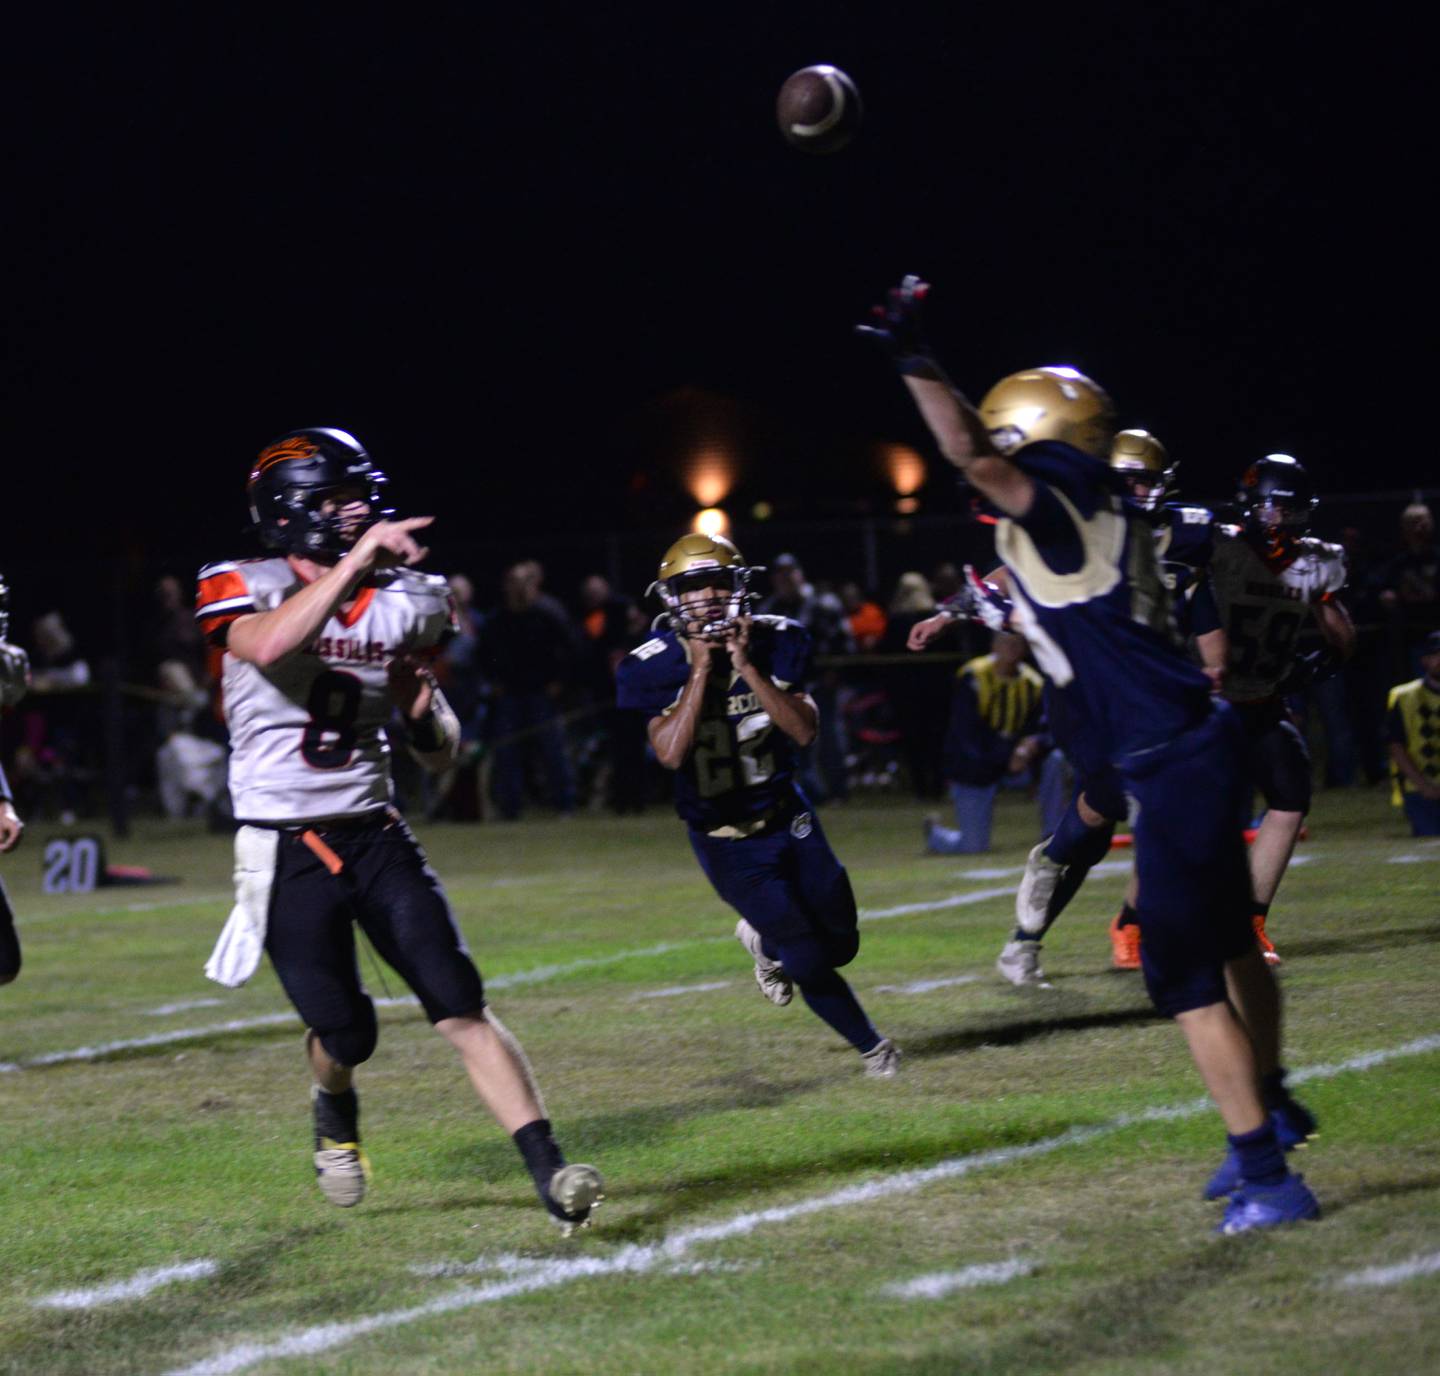 Milledgeville quarterback Connor Nye (8) floats a pass over a Marcos rusher during a Friday, Sept. 8, 2023 game at Polo High School.